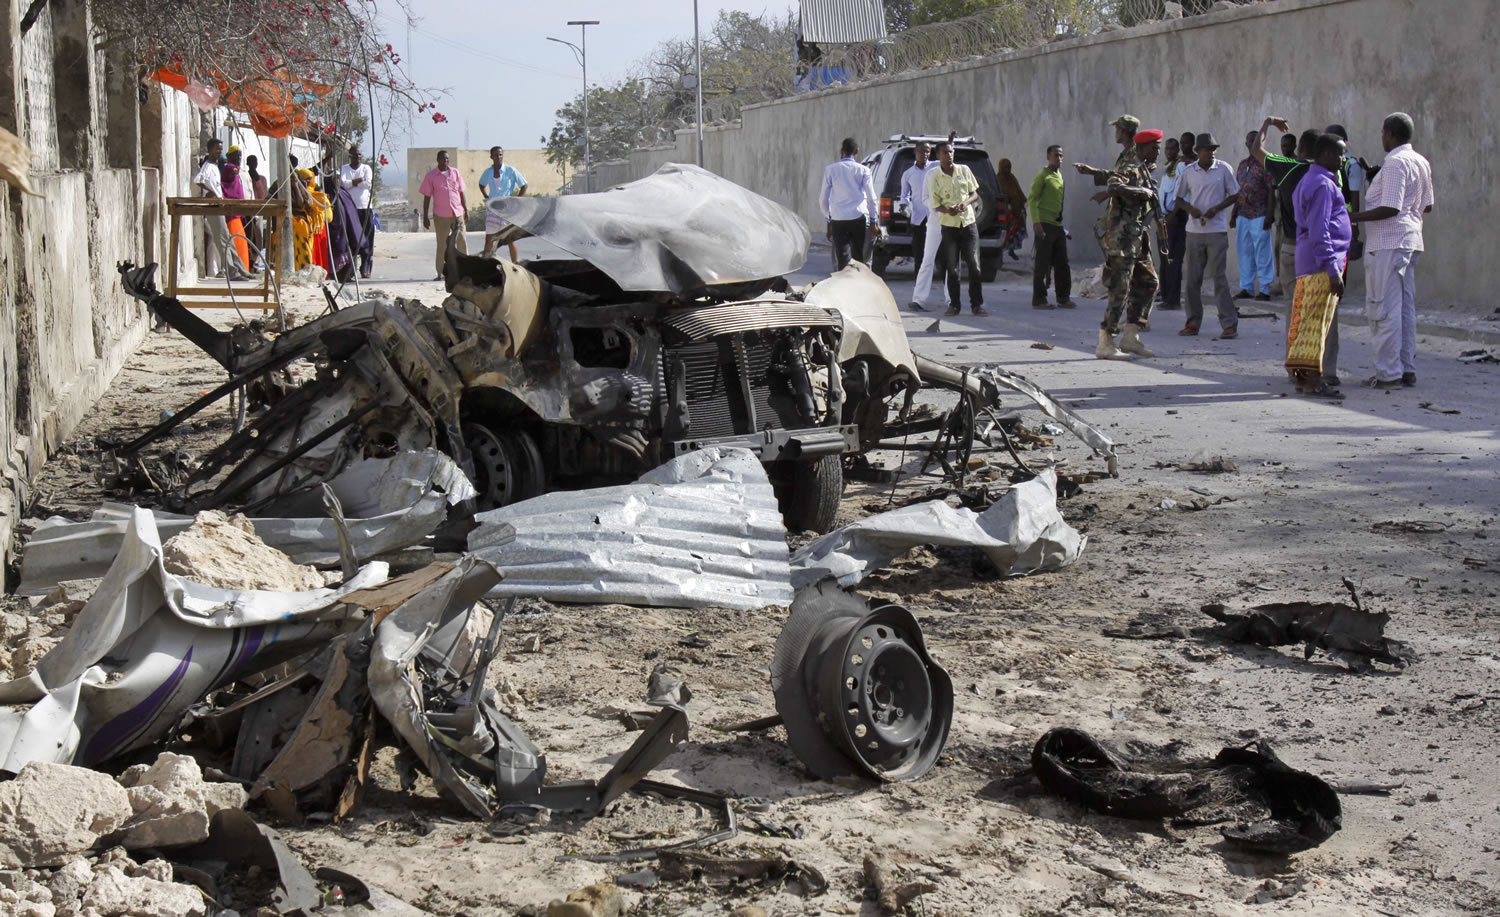 Somalis gather Friday near the wreckage of one of the vehicles used for a car bomb, following a militant attack on the presidential palace in Mogadishu, Somalia.